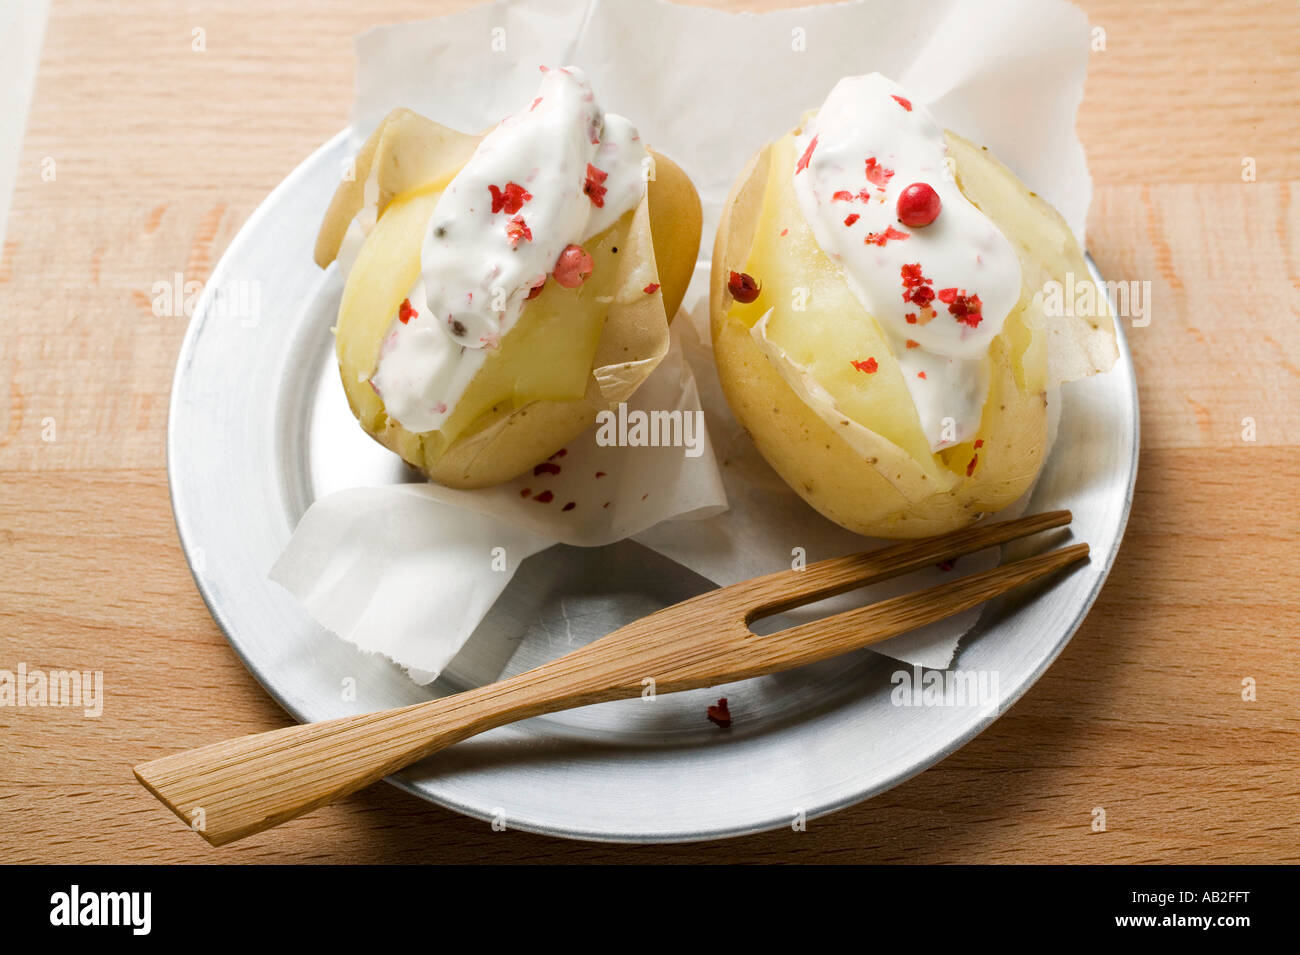 Potatoes cooked in their skins with sour cream red pepper FoodCollection Stock Photo